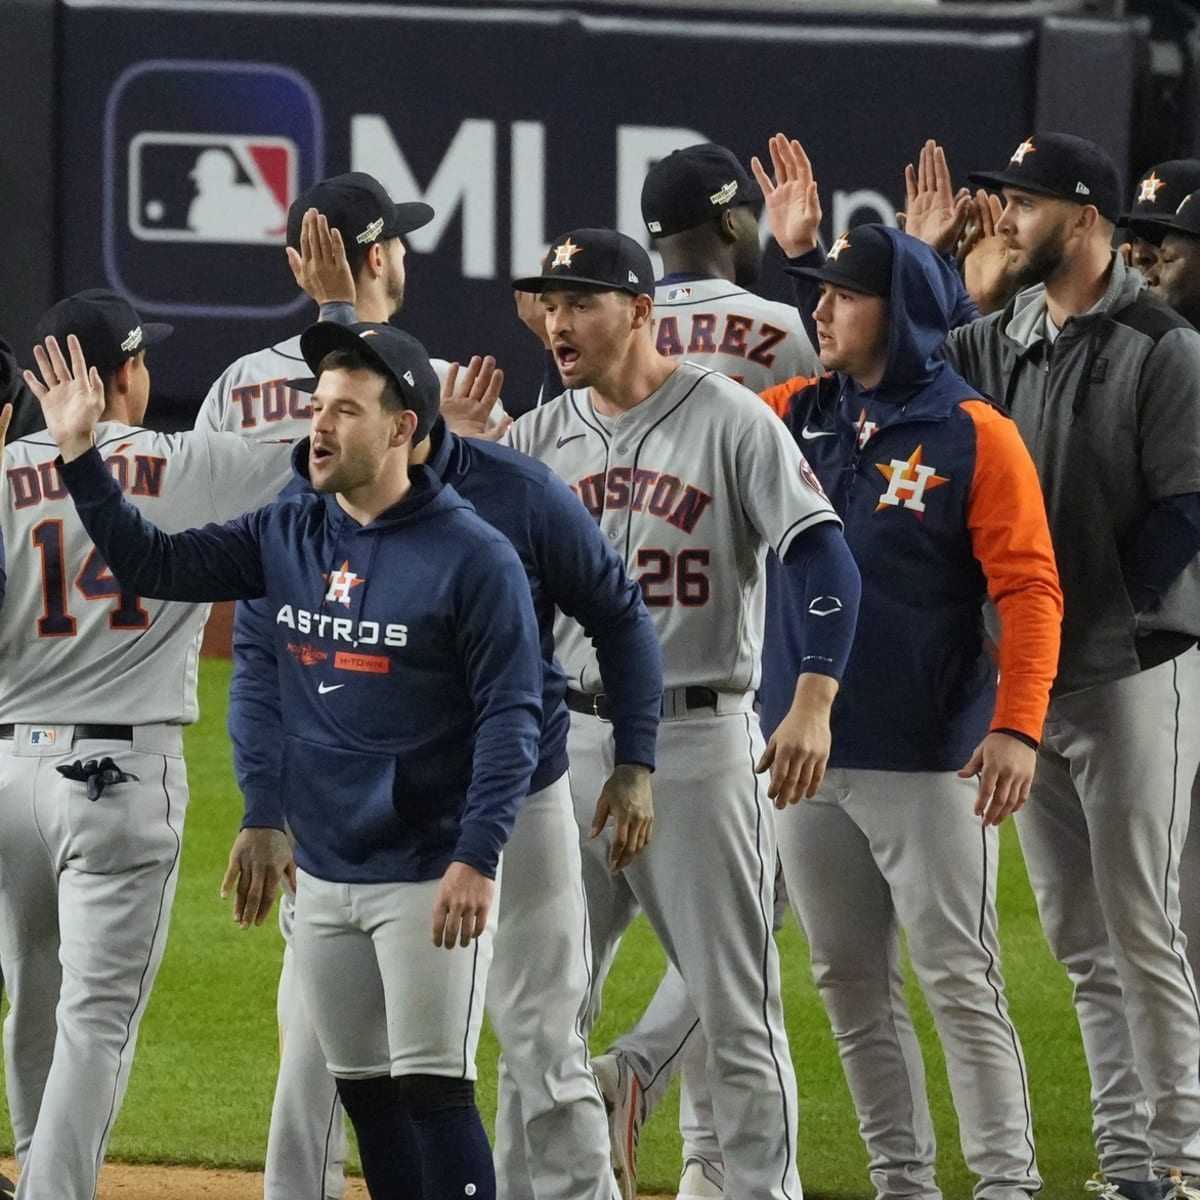 Astros Favored Over Phillies to Win World Series - The New York Times